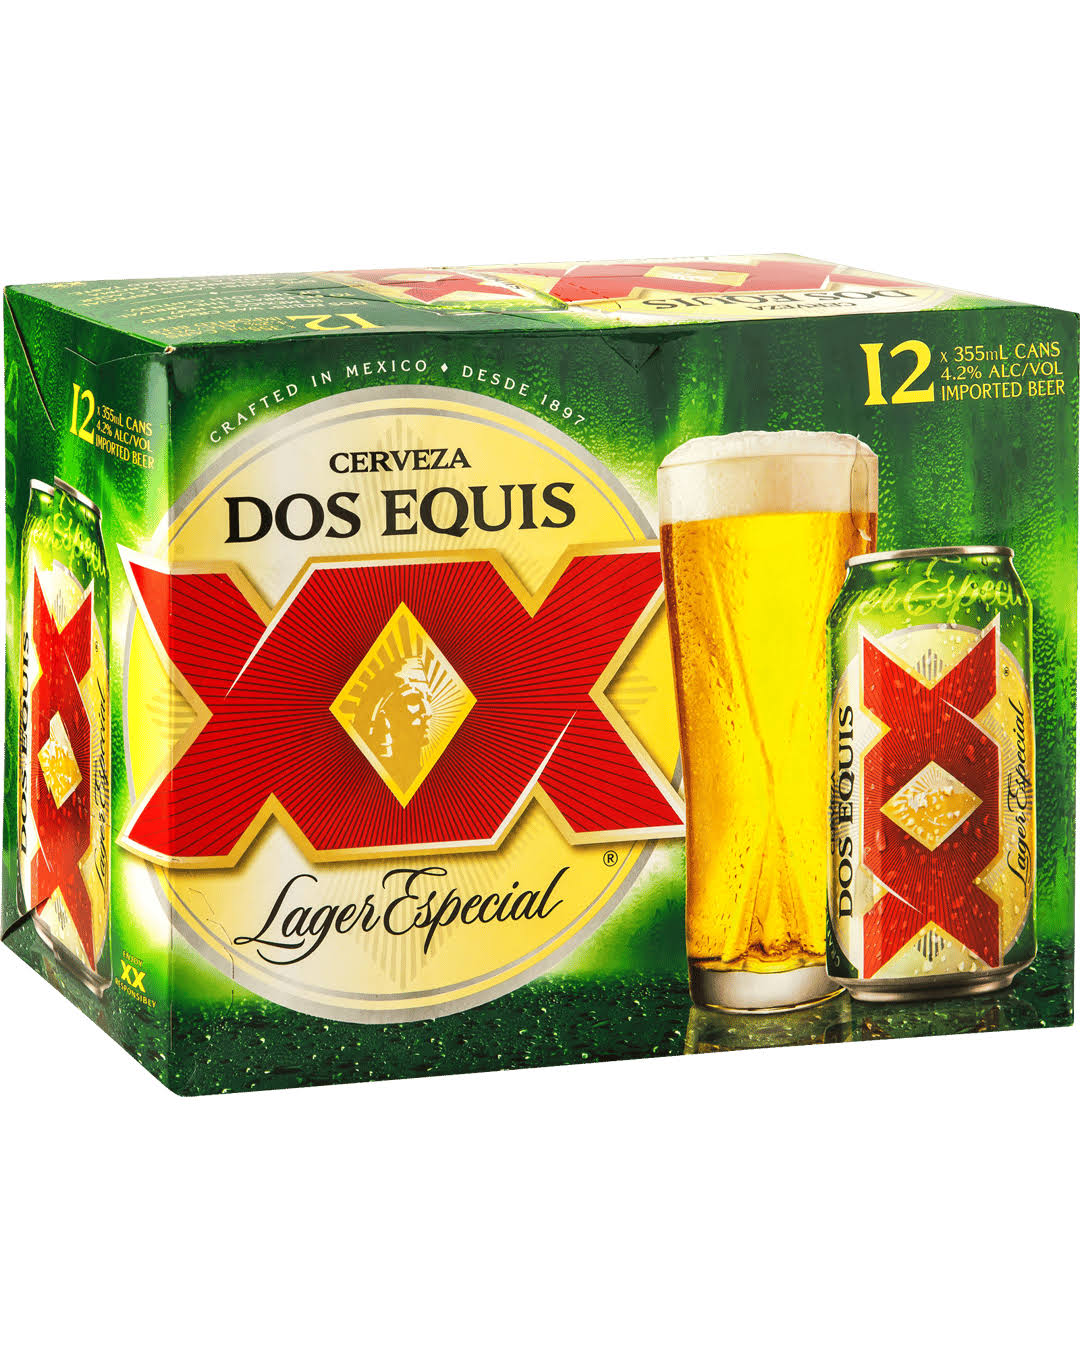 Dos Equis Lager Especial Beer - 12 Cans